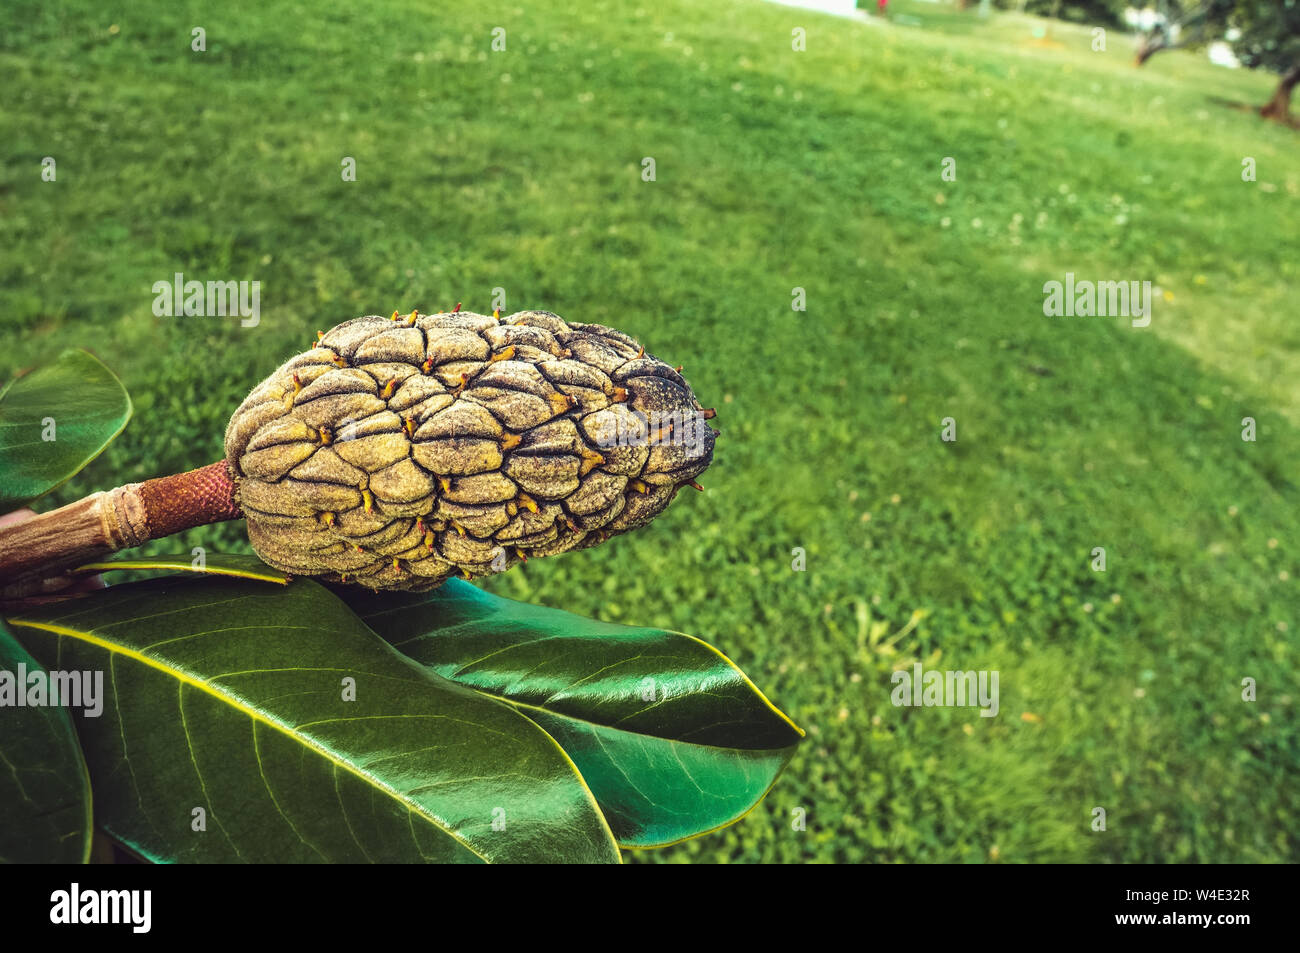 A cone is a Withered Magnolia flower on a branch against the lawn. Shut. Copy space Stock Photo